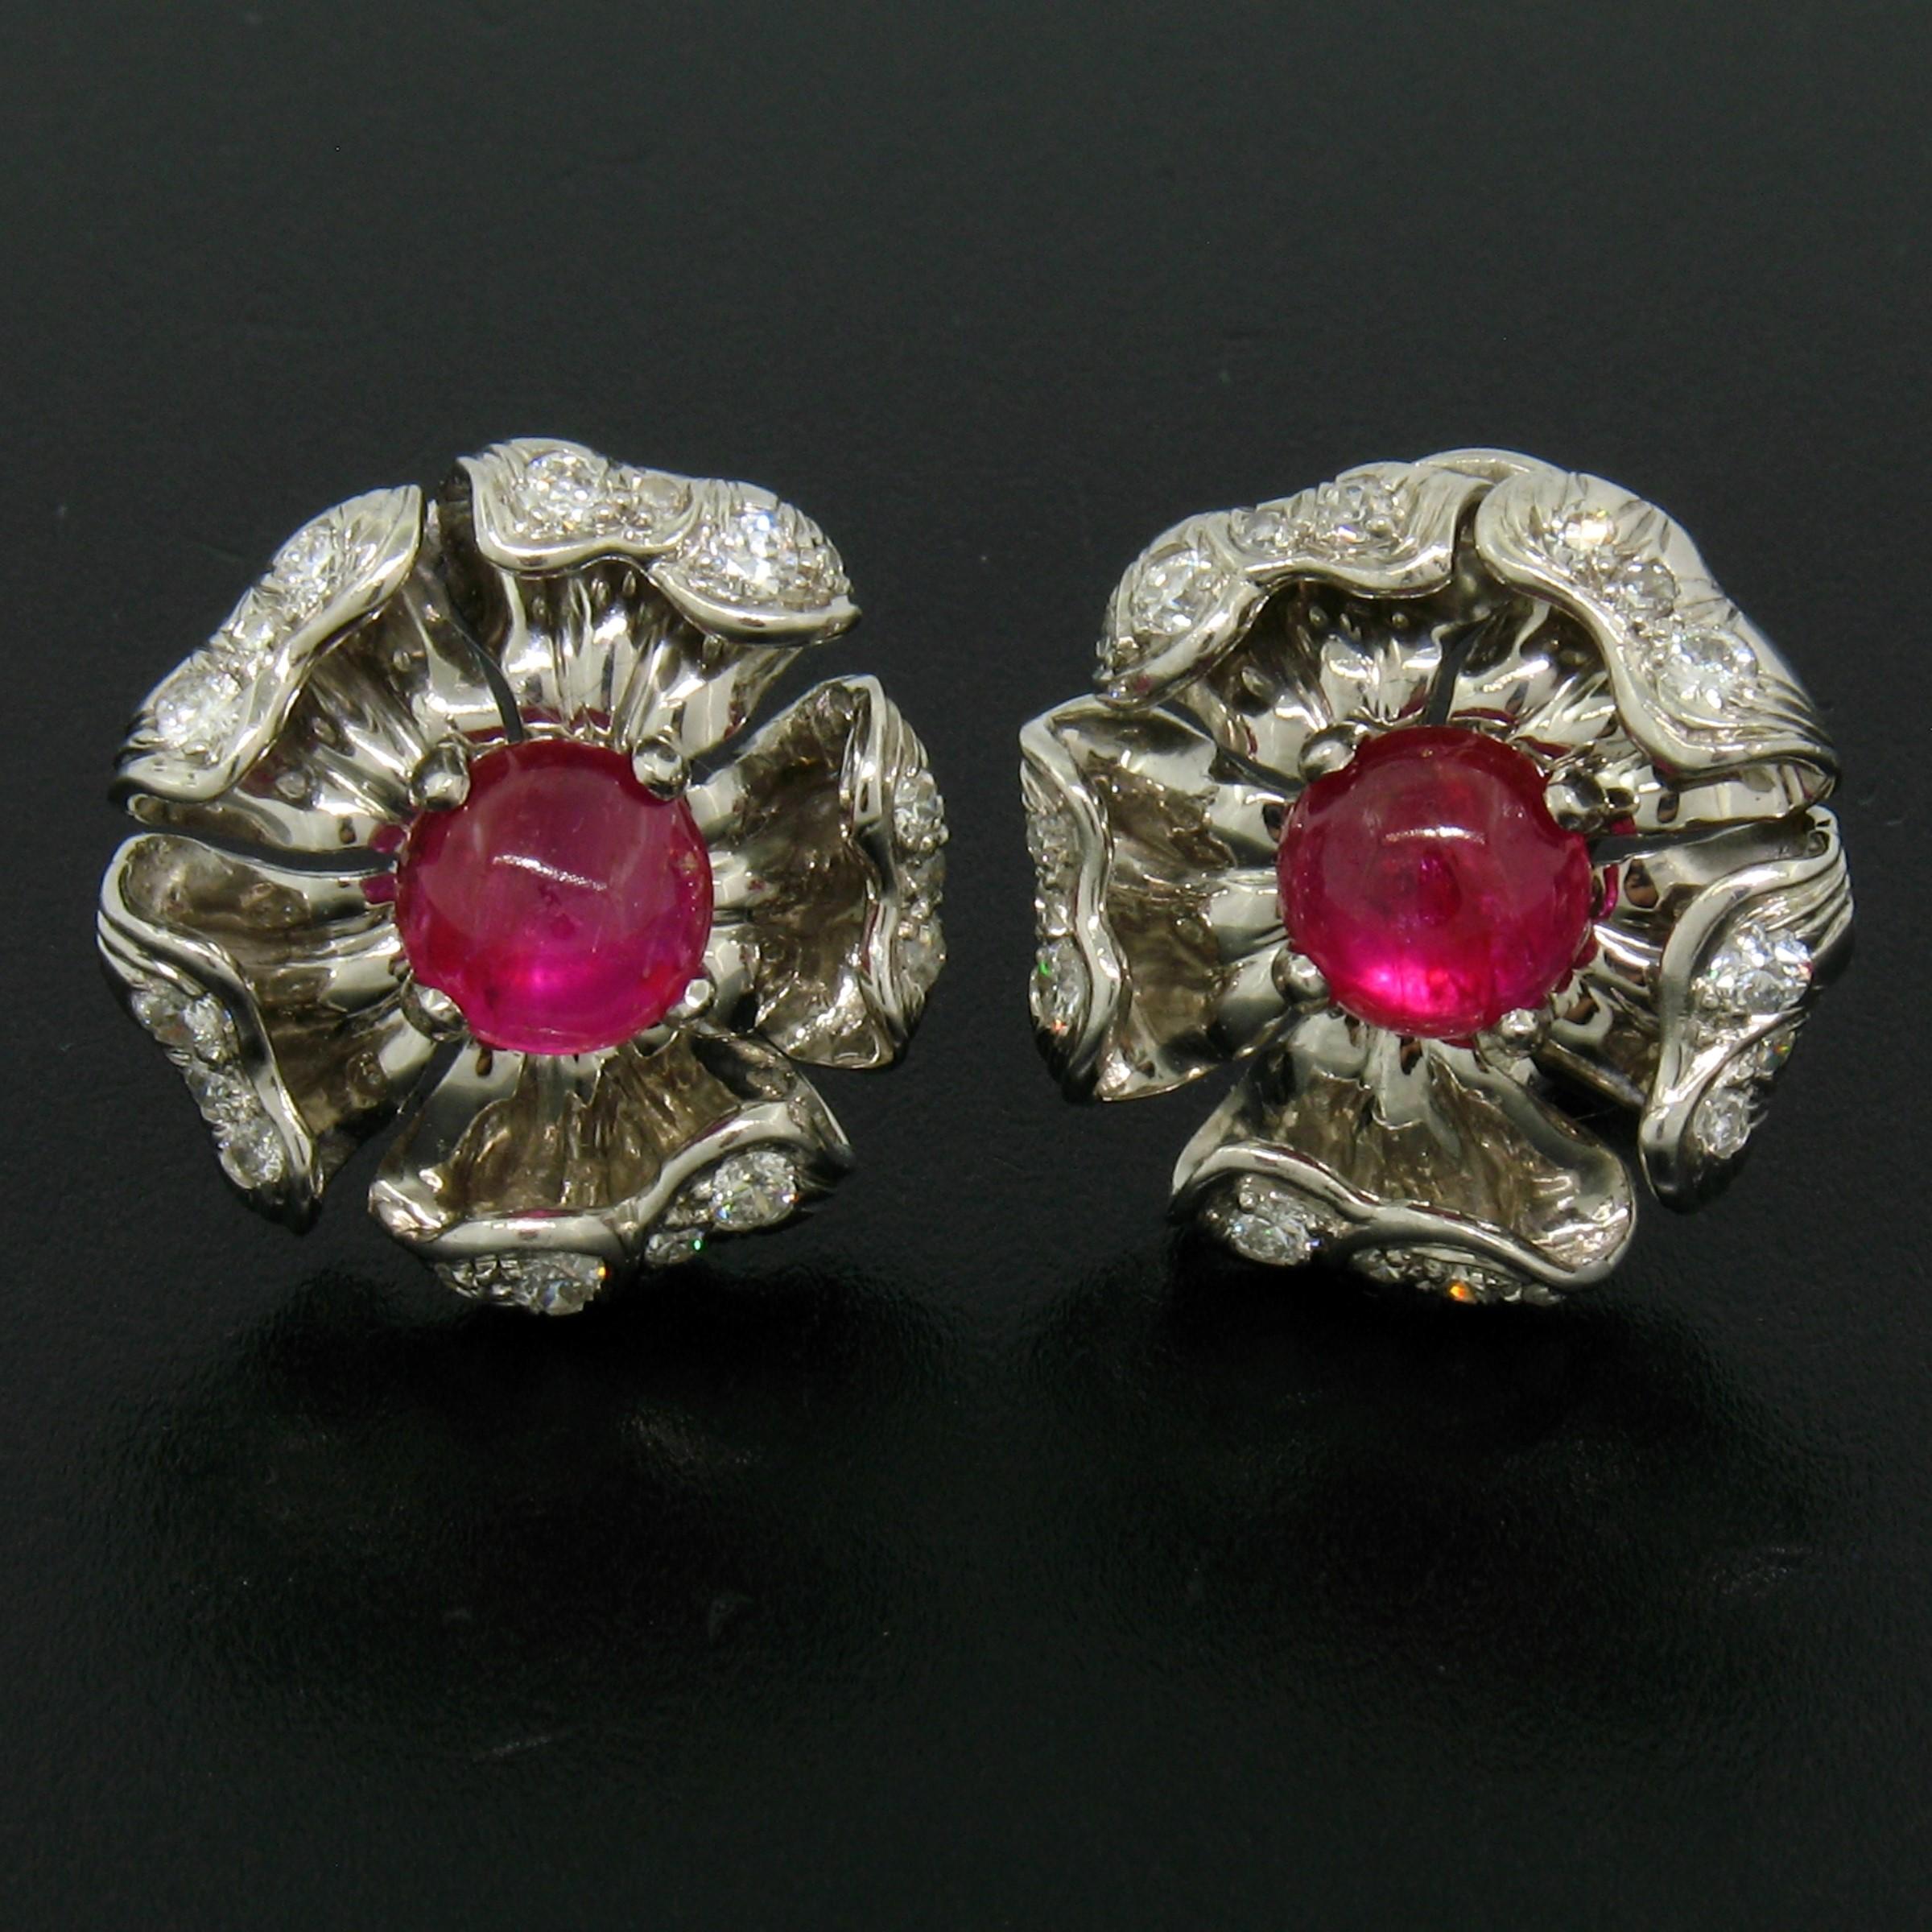 You are looking at a breathtaking pair of ruby and diamond earrings solidly and very well crafted in platinum. The ruby stones display very rich and desirable red color throughout their cabochon cut. Each stone is prong set at the center of the